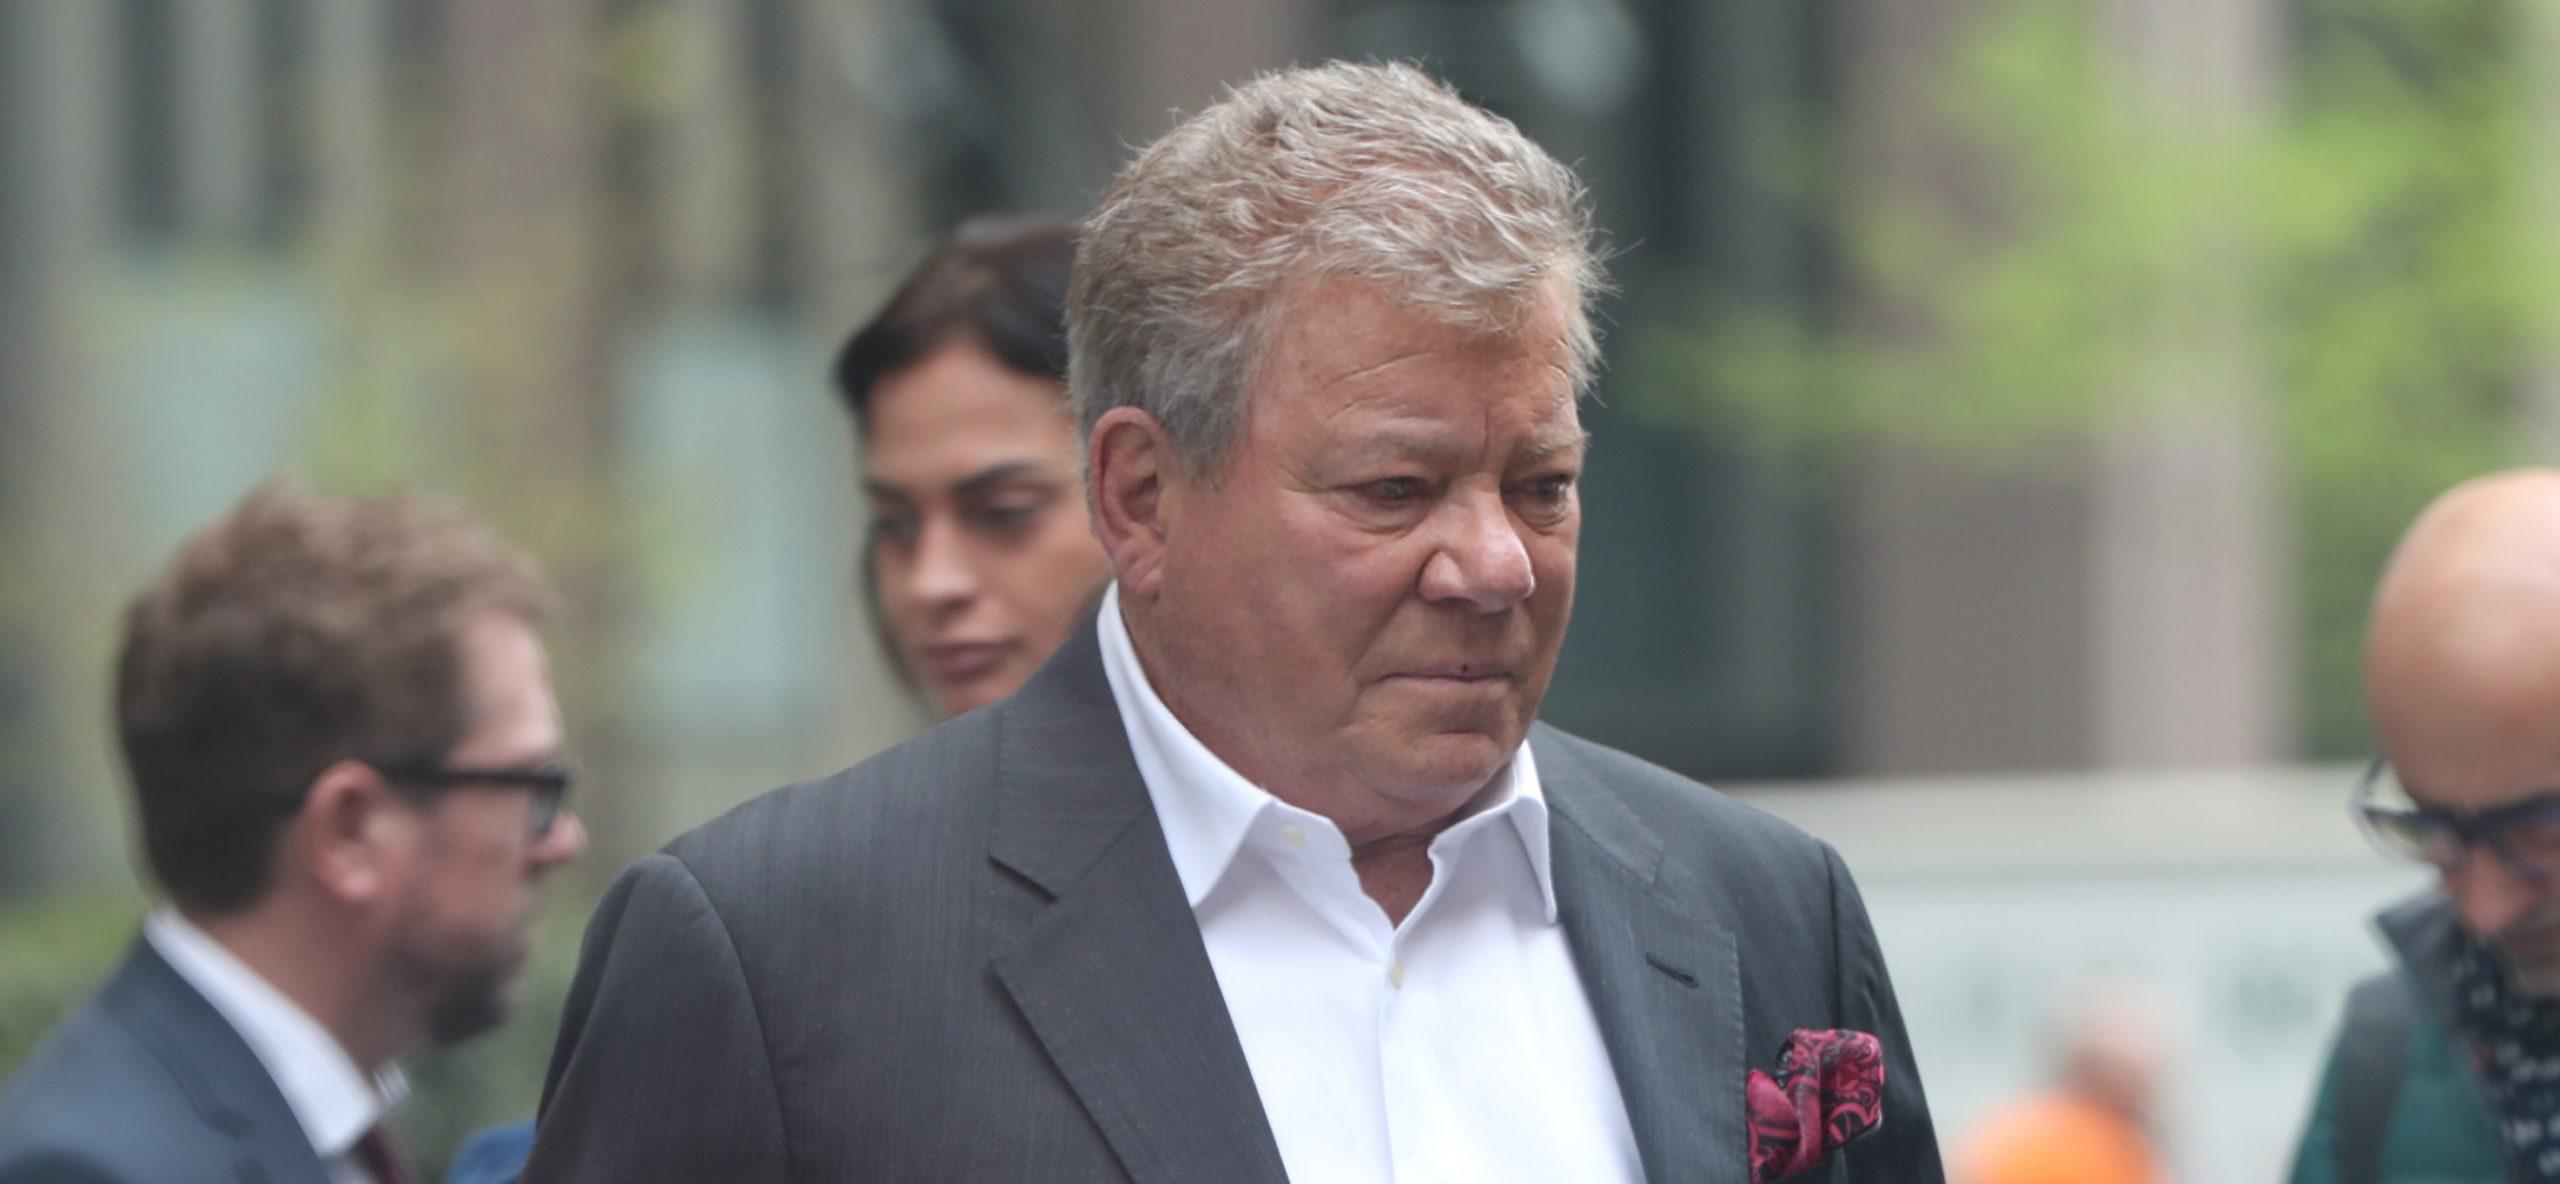 William Shatner spotted in New York